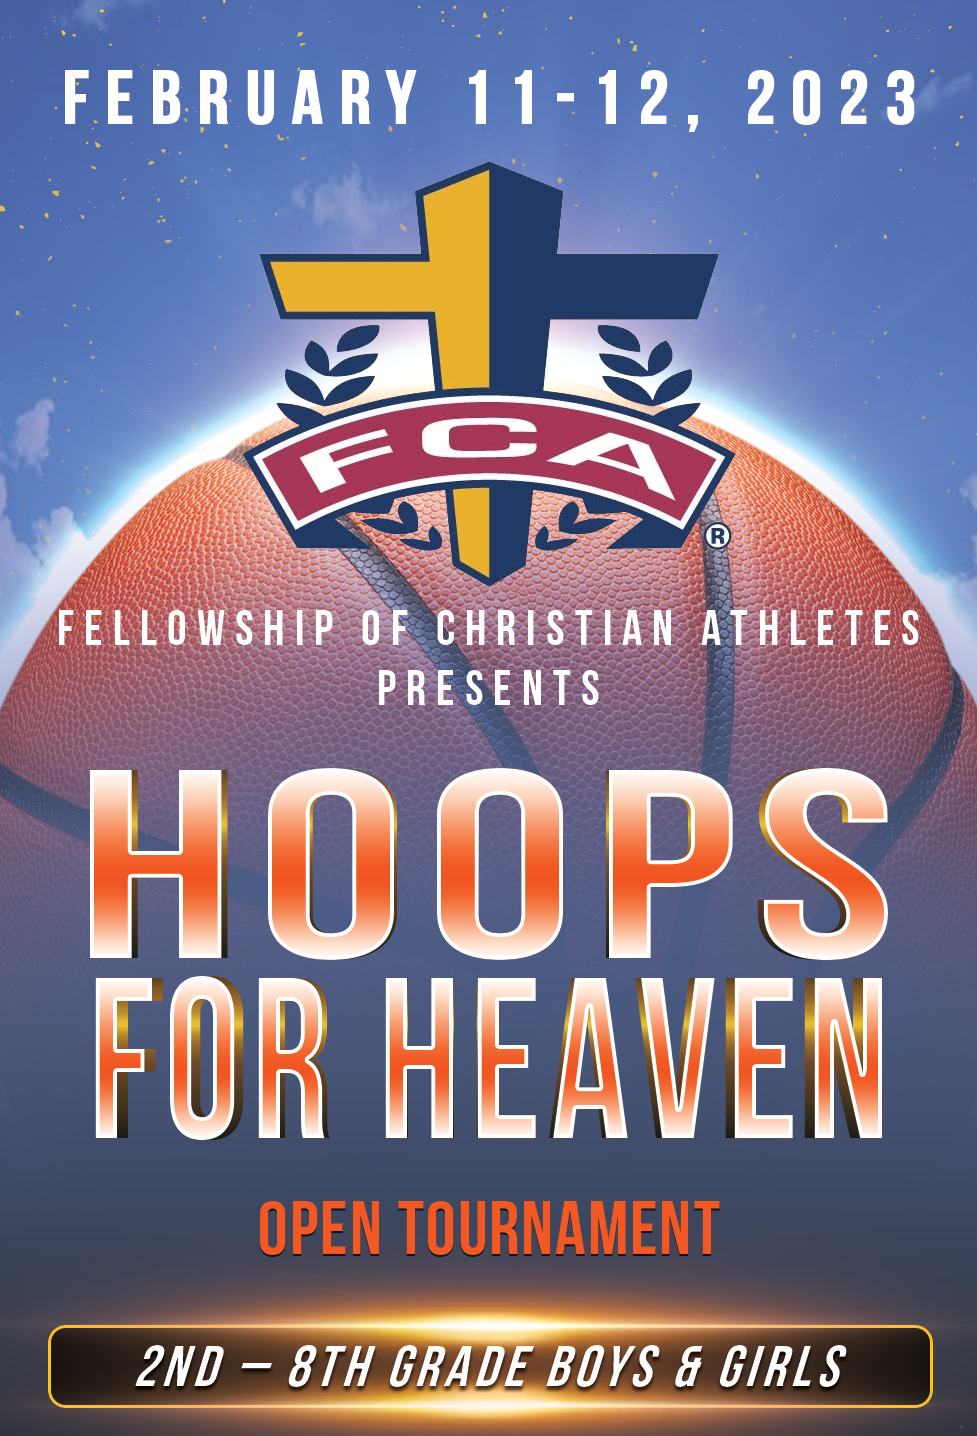 <span style="font-size: 12pt;"><strong><span style="color: #ff6600;"><strong>FCA "Hoops for Heaven"<br /></strong>Feb. 11-12, 2023<strong><br /></strong>Open Tournament<strong><br /><a href="http://www.midwestbballtournaments.com/ViewEvent.aspx?EID=1020">Click Here for more Info</a></strong></span></strong></span>